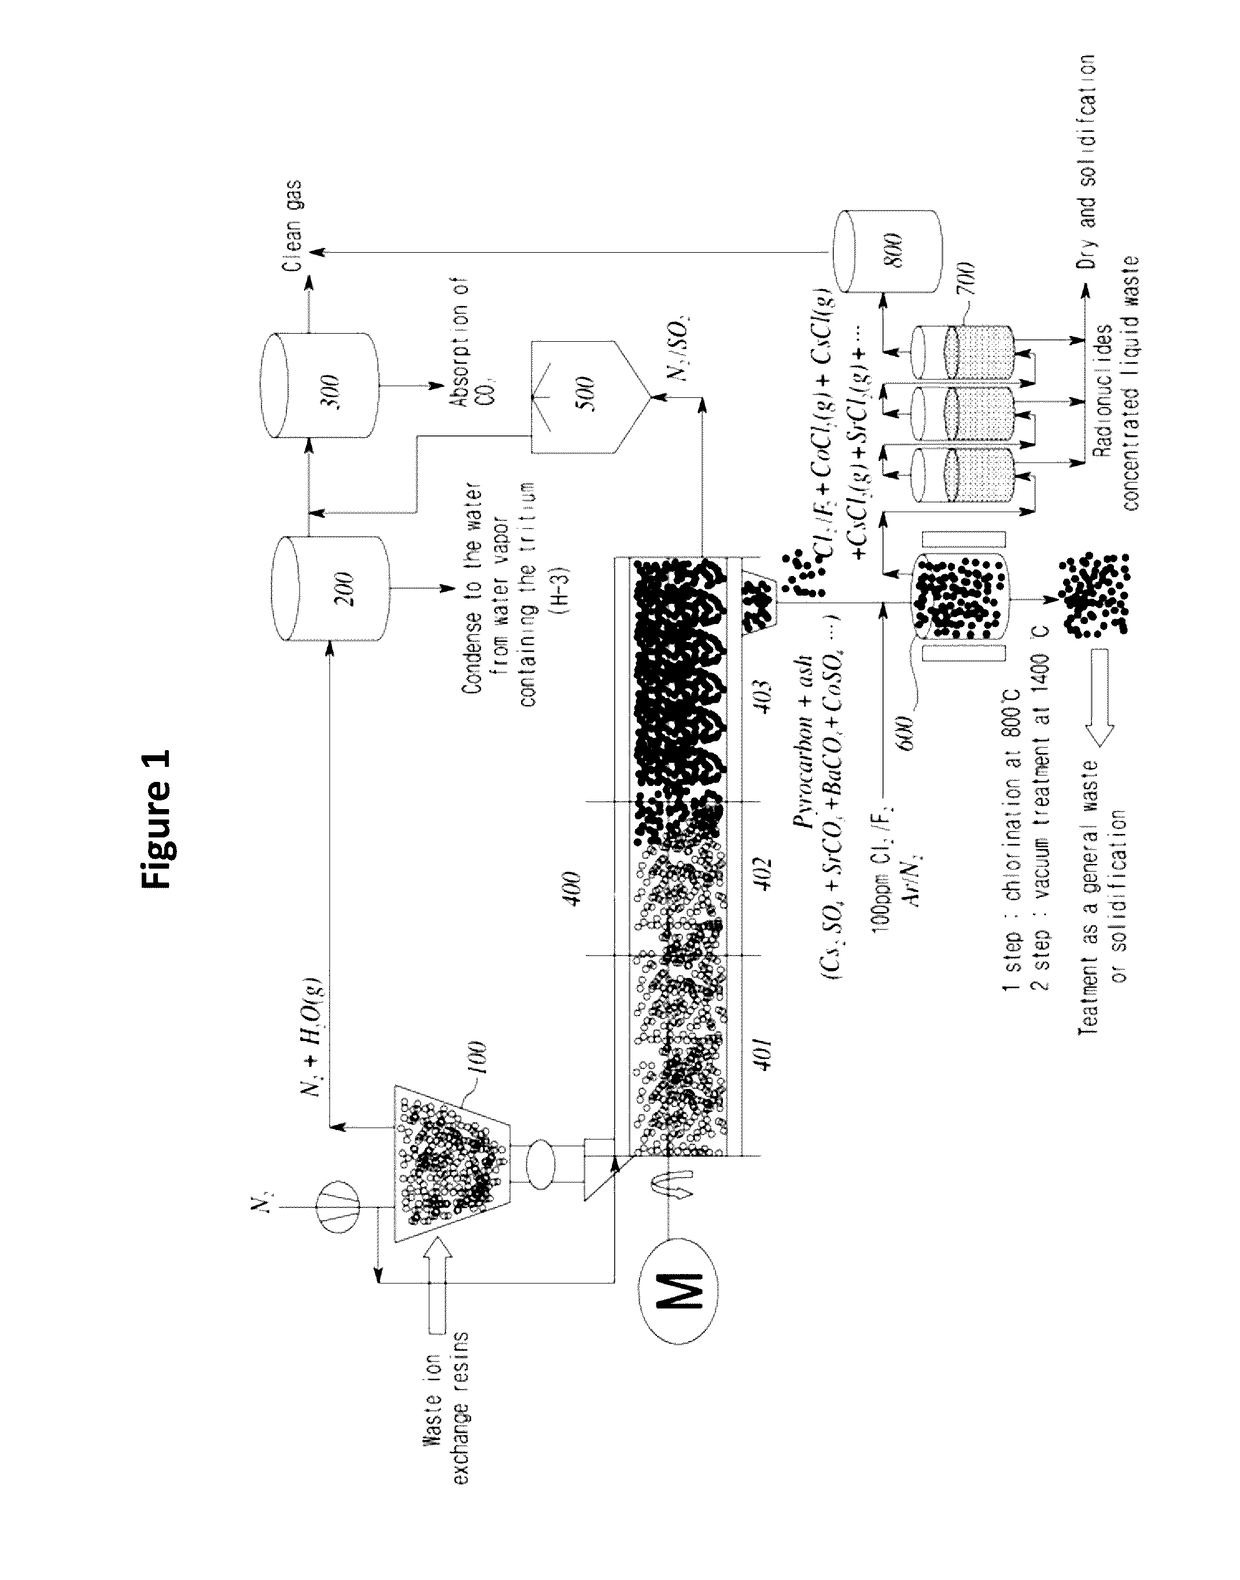 Method for treatment of spent radioactive ion exchange resins, and the apparatus thereof